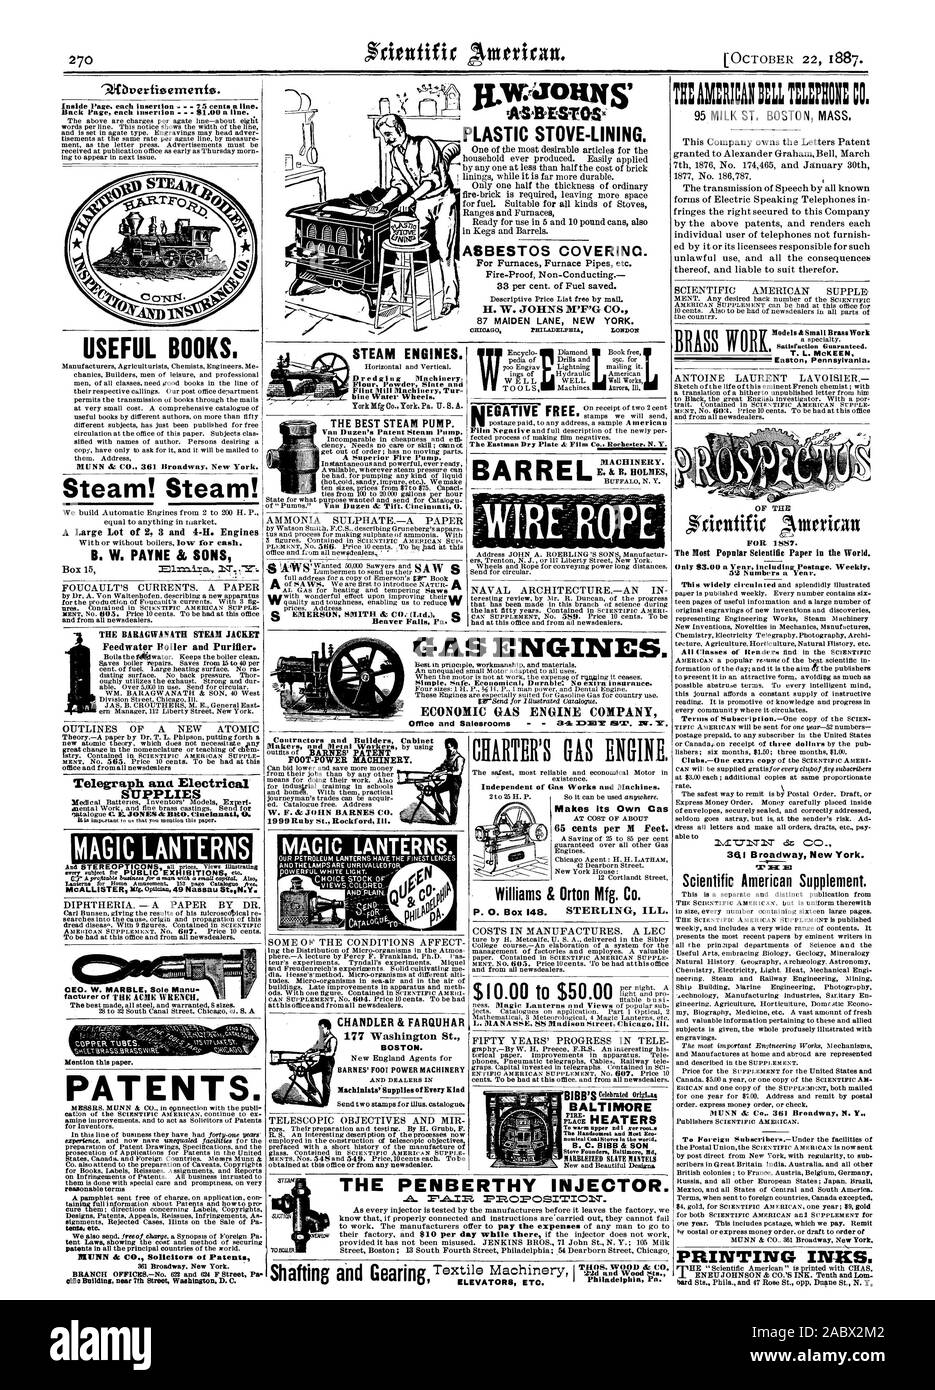 9Overfisernenfe. THE BEST STEAM PUMP. USEFUL BOOKS. B. W. PAYNE & SONS PATENTS. N BARREL AM:RICAN : :3: CO. 95 MILK ST. BOSTON MASS. Easton Pennsylvania. FOR 1587. The Most Popular Scientific Paper in the World. x-x Scientific American Supplement. Telegraph an.a. Electrical MAGIC LANTERNS McALLISTER Dift.OPiku 49 Nassau St.N.V. STEAM ENGINES. York Mfg Ho. York Pa H. S. A. Rywoulisi ASABESTOS. PLASTIC STOVE-LINING ASBESTOS COVERING. 87 MAIDEN LANE NEORK. GAS ENGINES. ECONOMIC GAS ENGINE COMPANY Office and Salesrooms  IaMtlY ISPr. DT. MAGIC LANTERNS. st pPt  CHANDLER & FARQUHAR Machinists Stock Photo